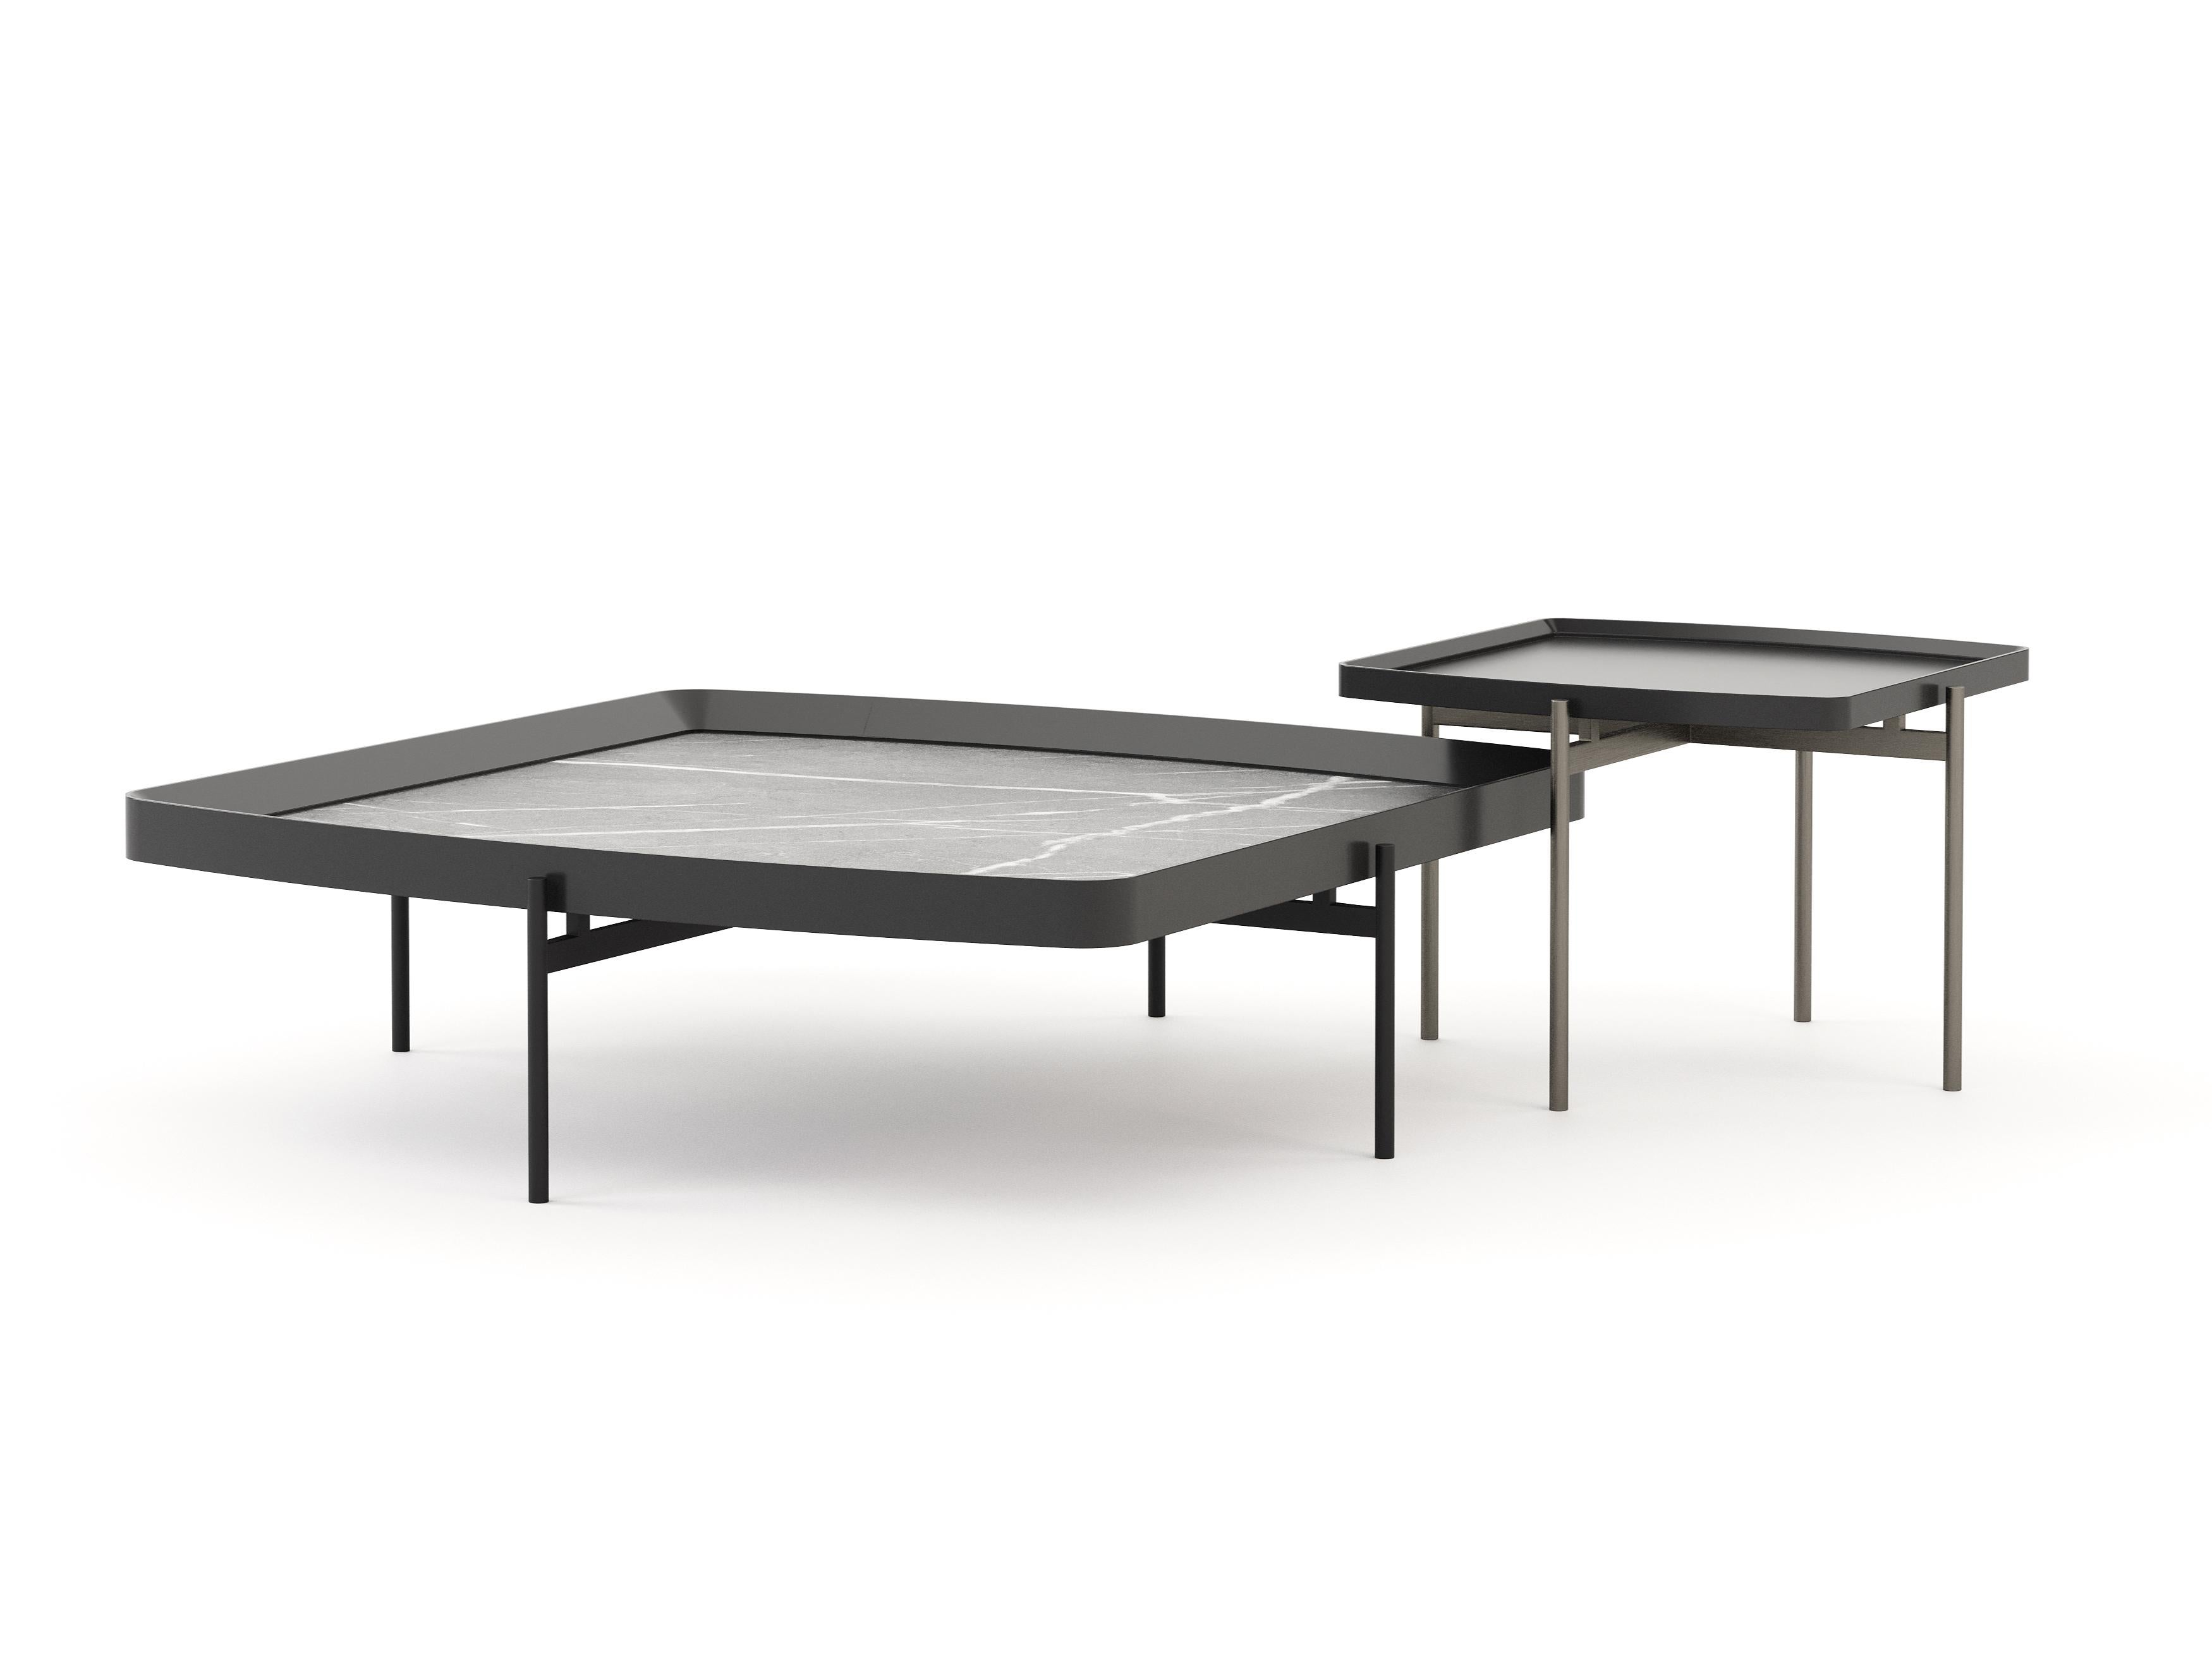 Iron Modern Capri Coffee Tables made with iron and ceramic, Handmade by Stylish Club For Sale